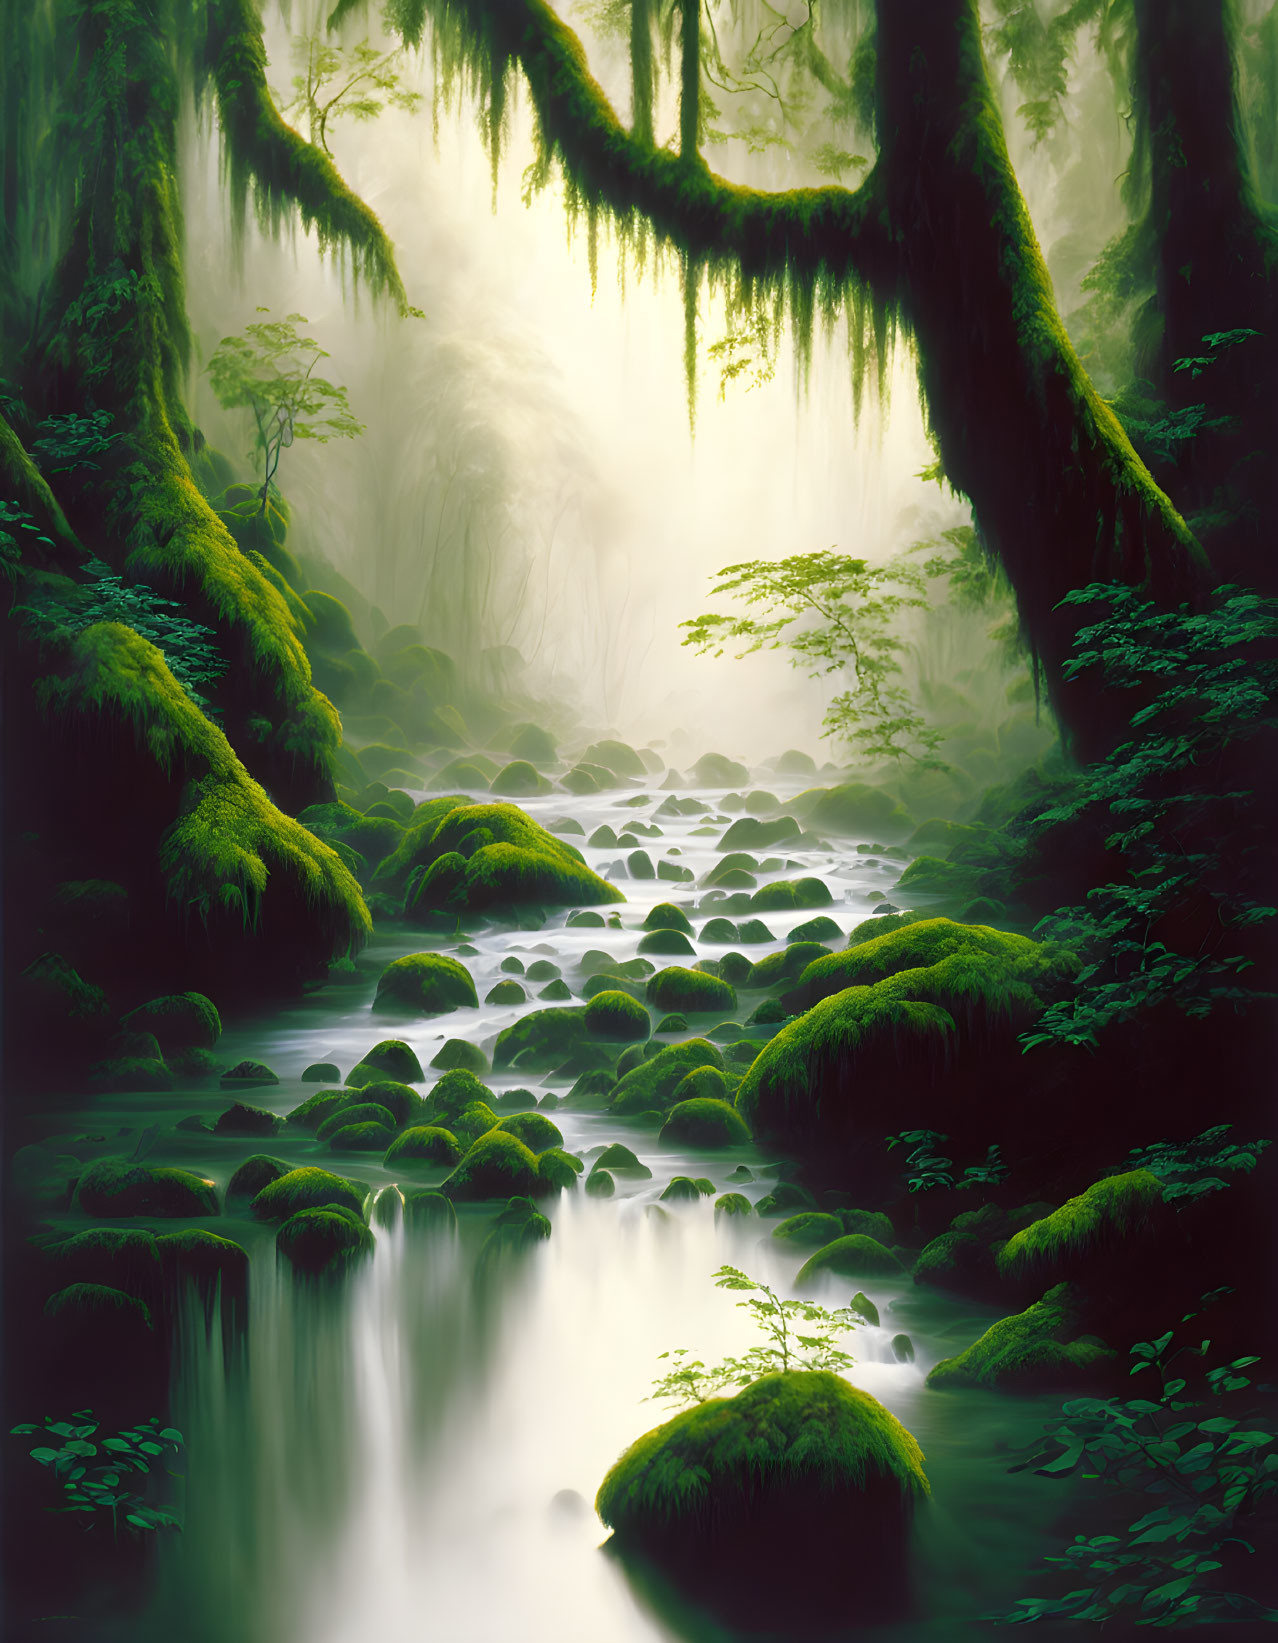 Tranquil forest landscape with misty river and lush greenery